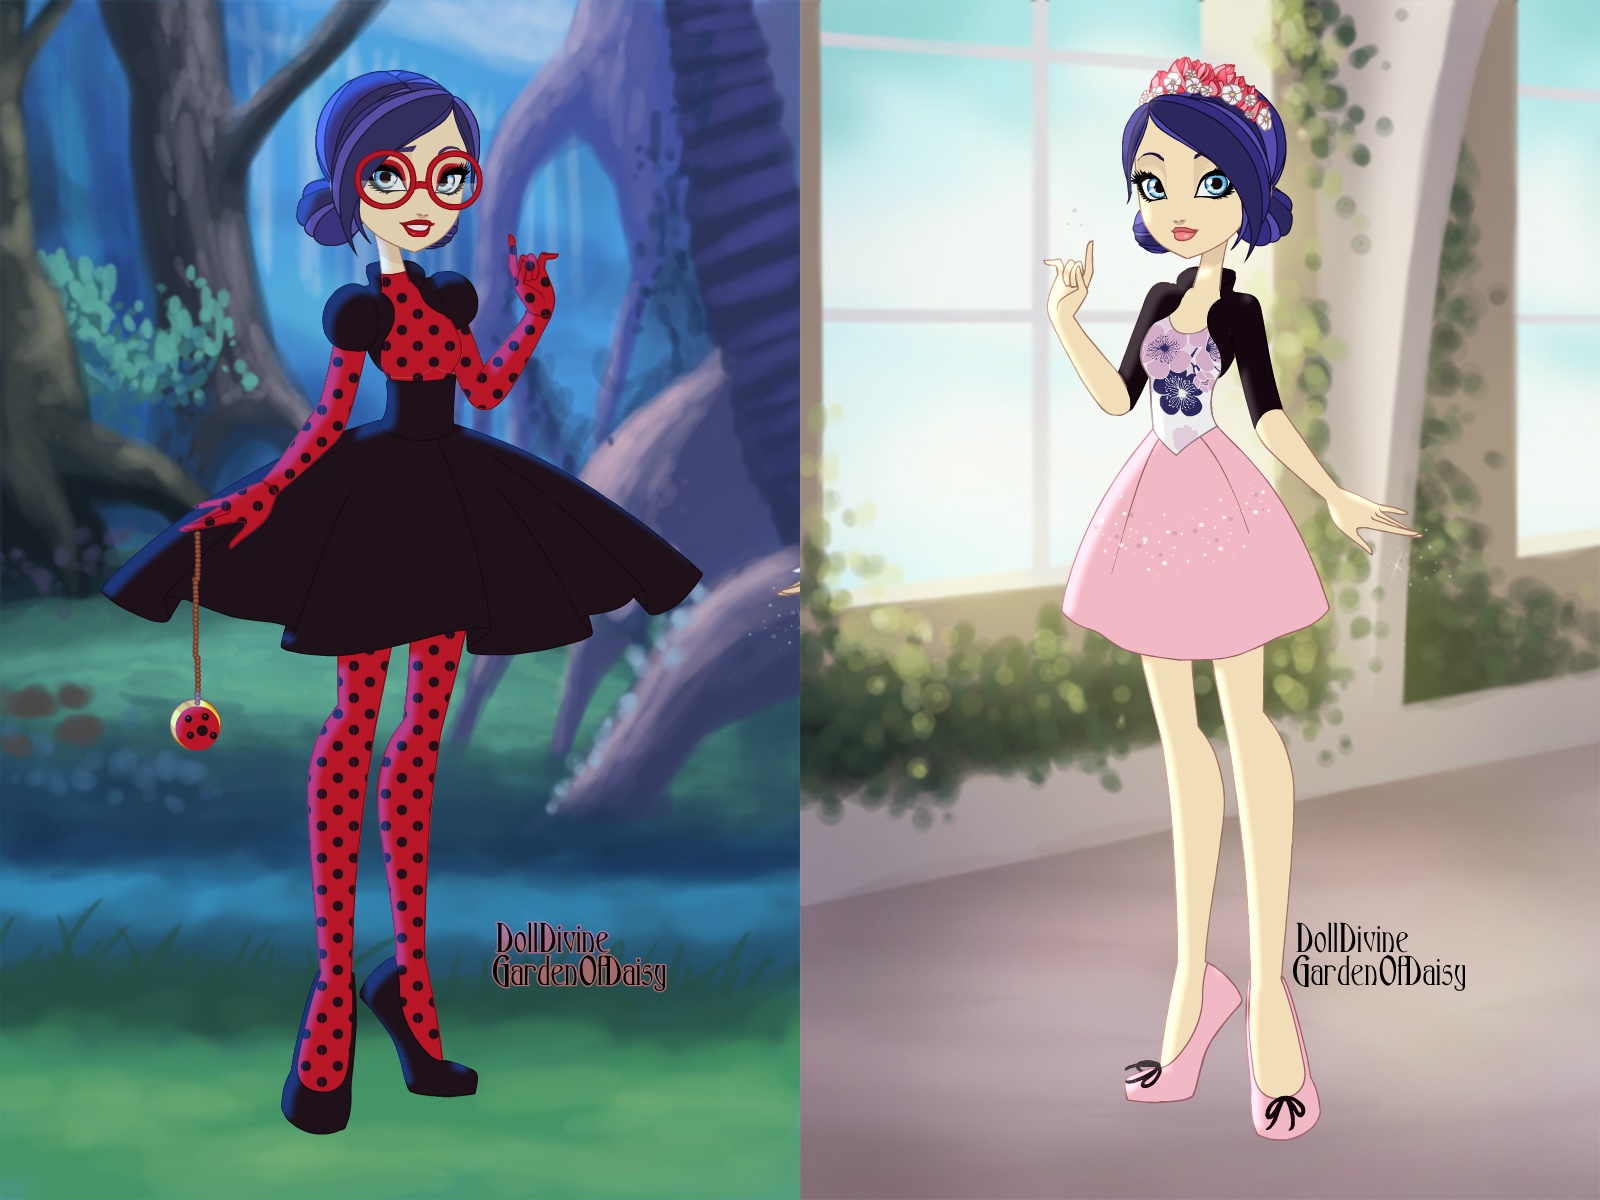 ever after high all characters wallpaper